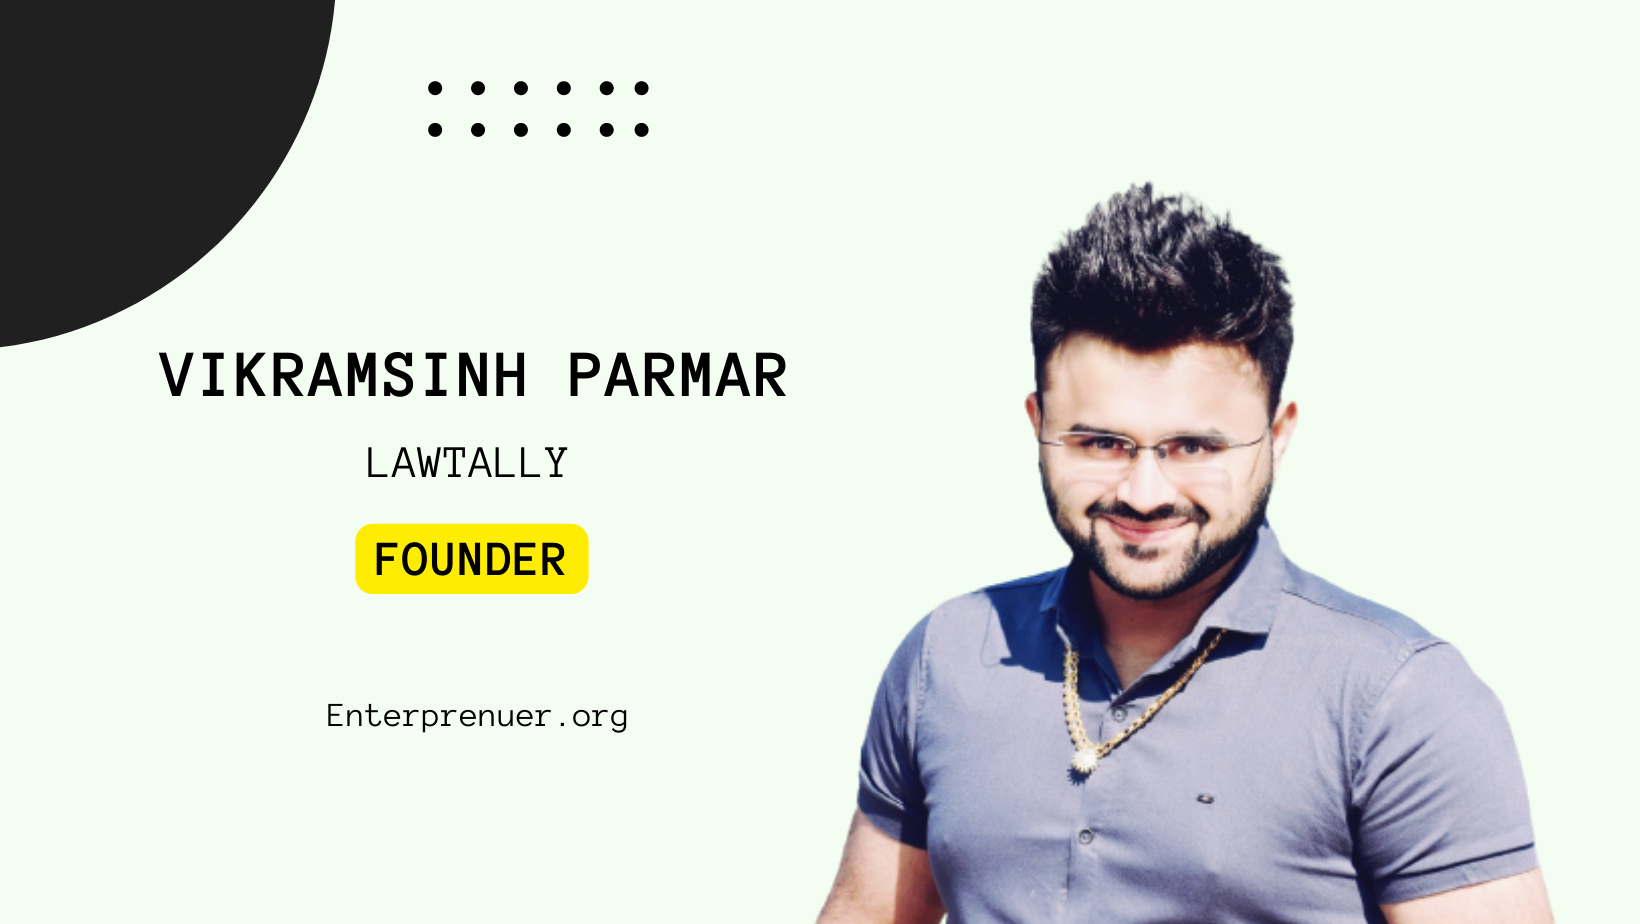 Meet Vikramsinh Parmar, Founder of LawTally